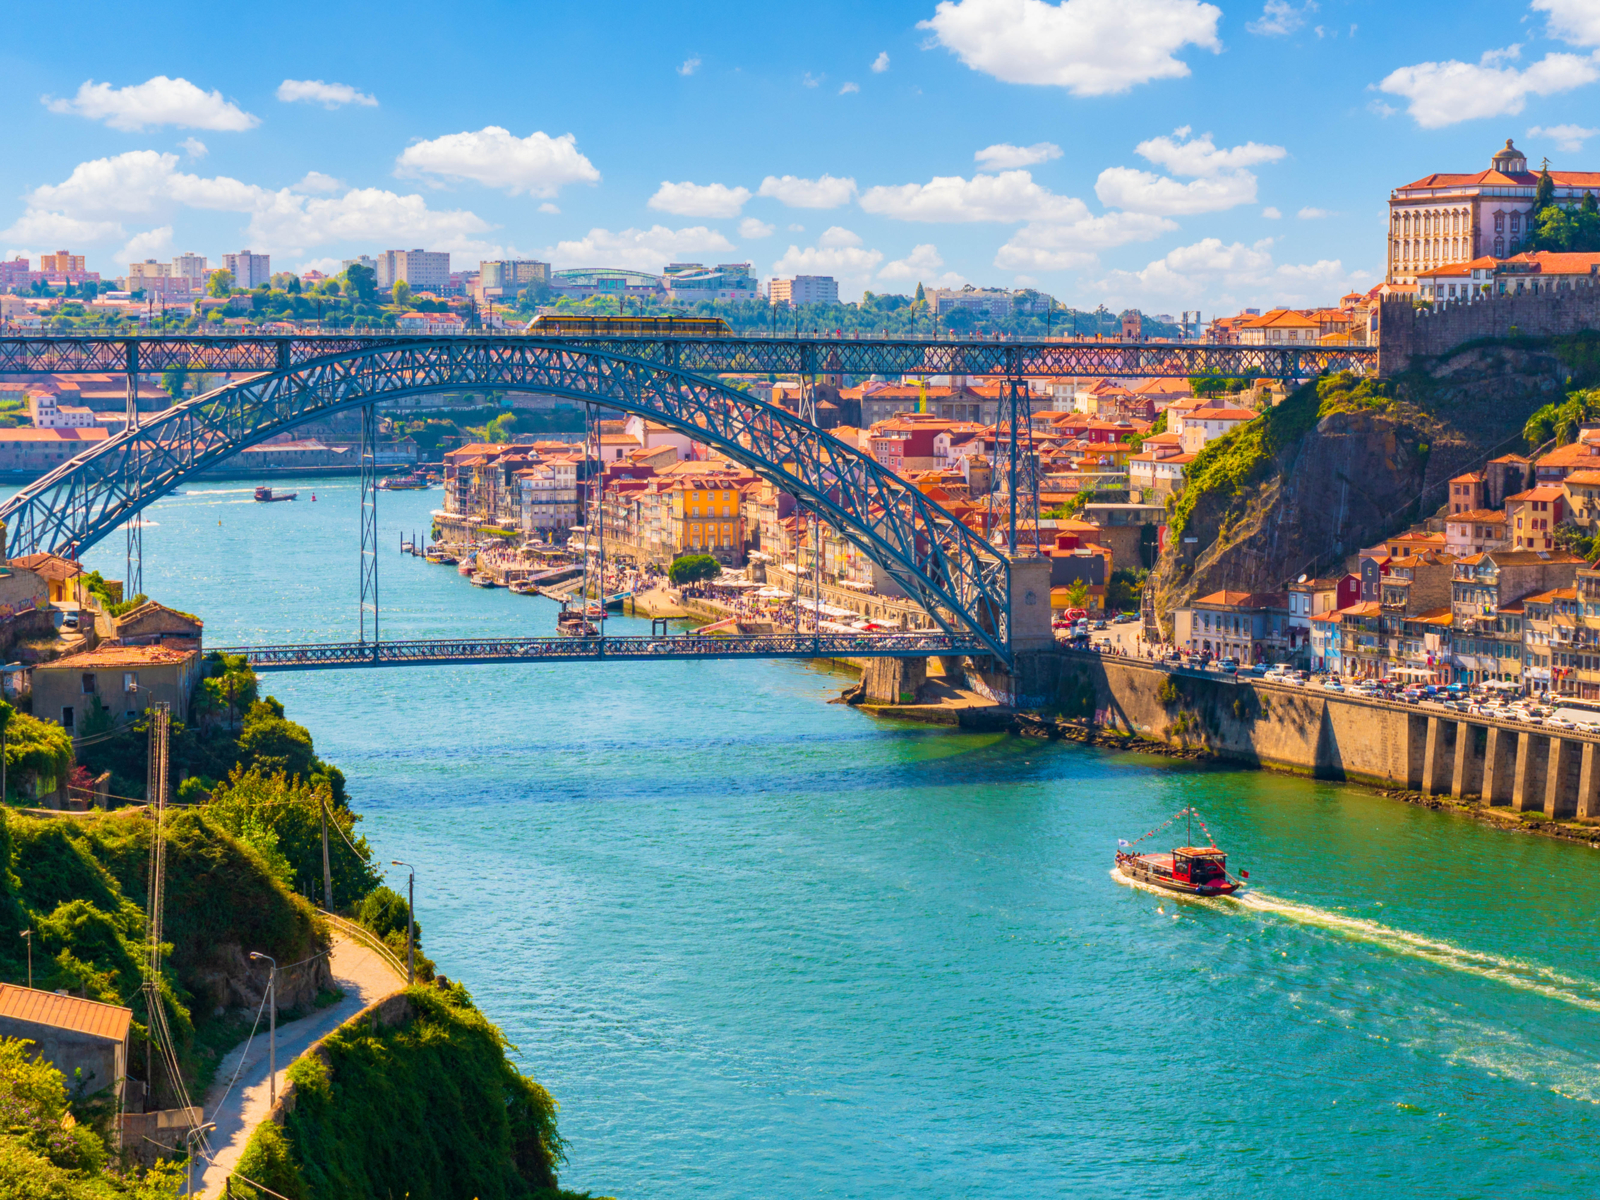 For a piece on the best time to visit Portugal, a bridge in a picturesque photo in old town Porto